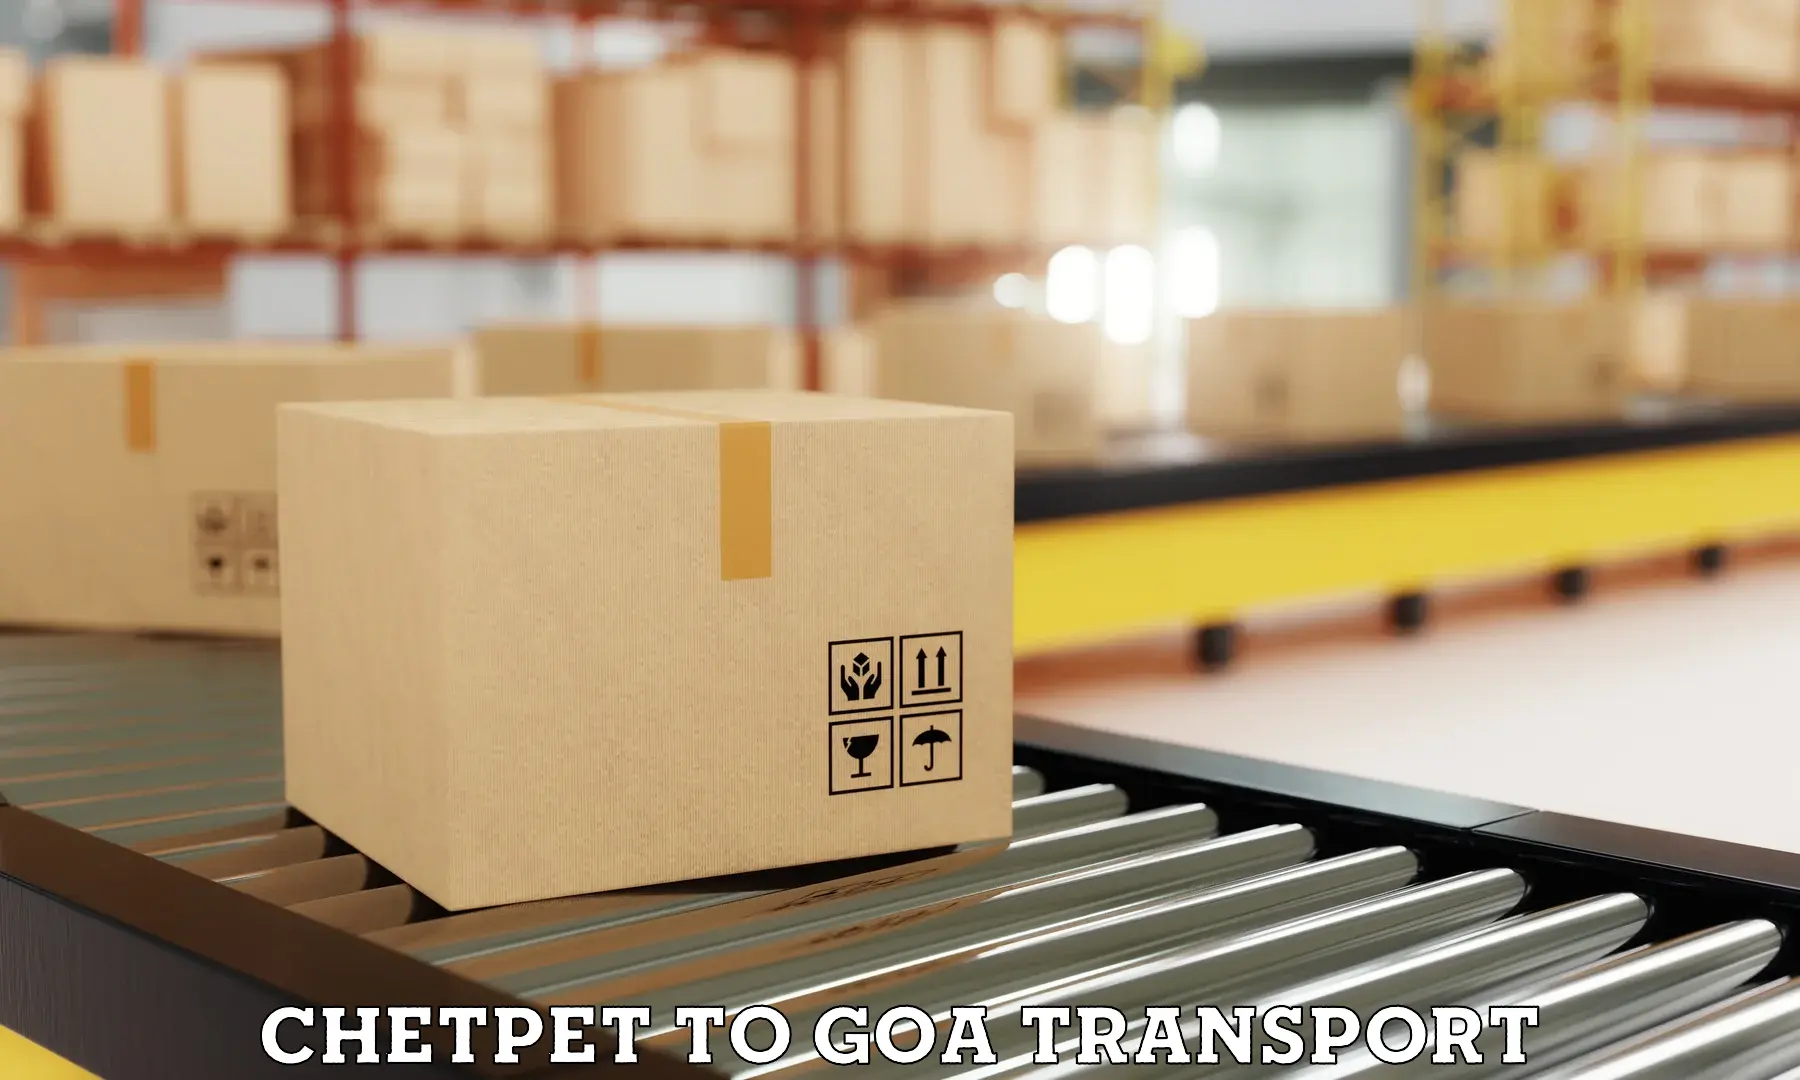 Transport bike from one state to another Chetpet to IIT Goa